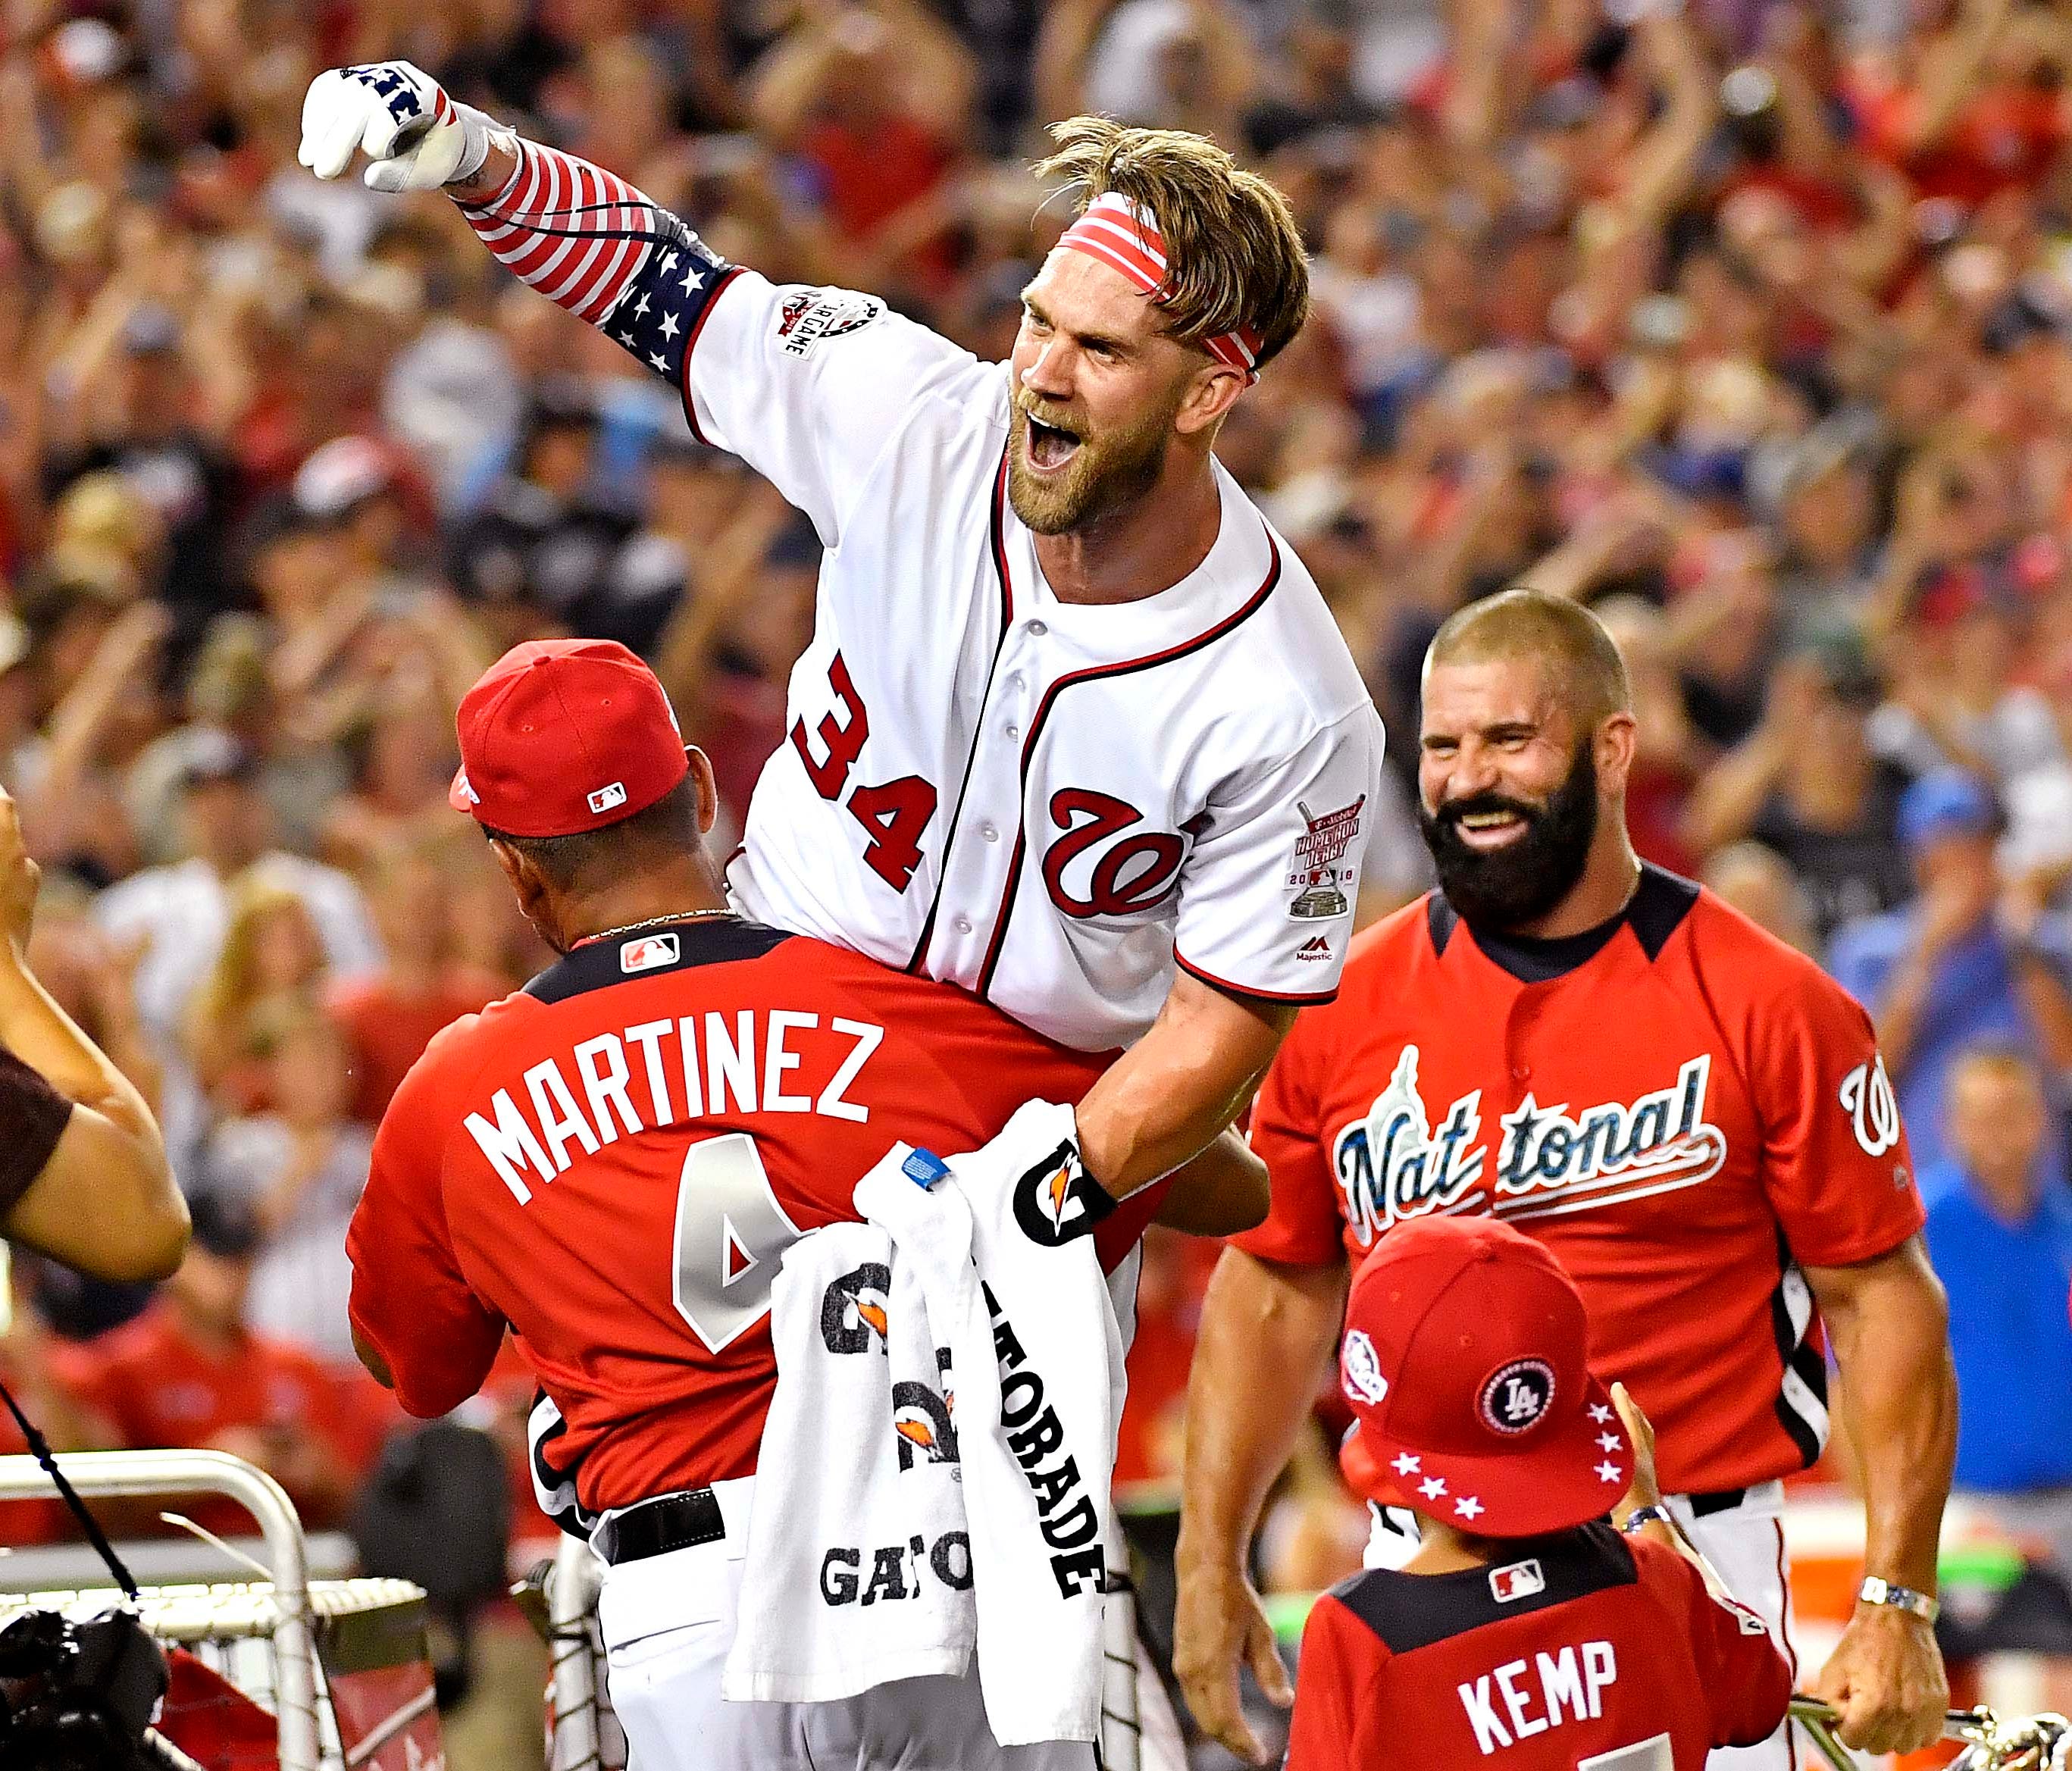 Bryce Harper celebrates with manager Dave Martinez after winning the Home Run Derby.